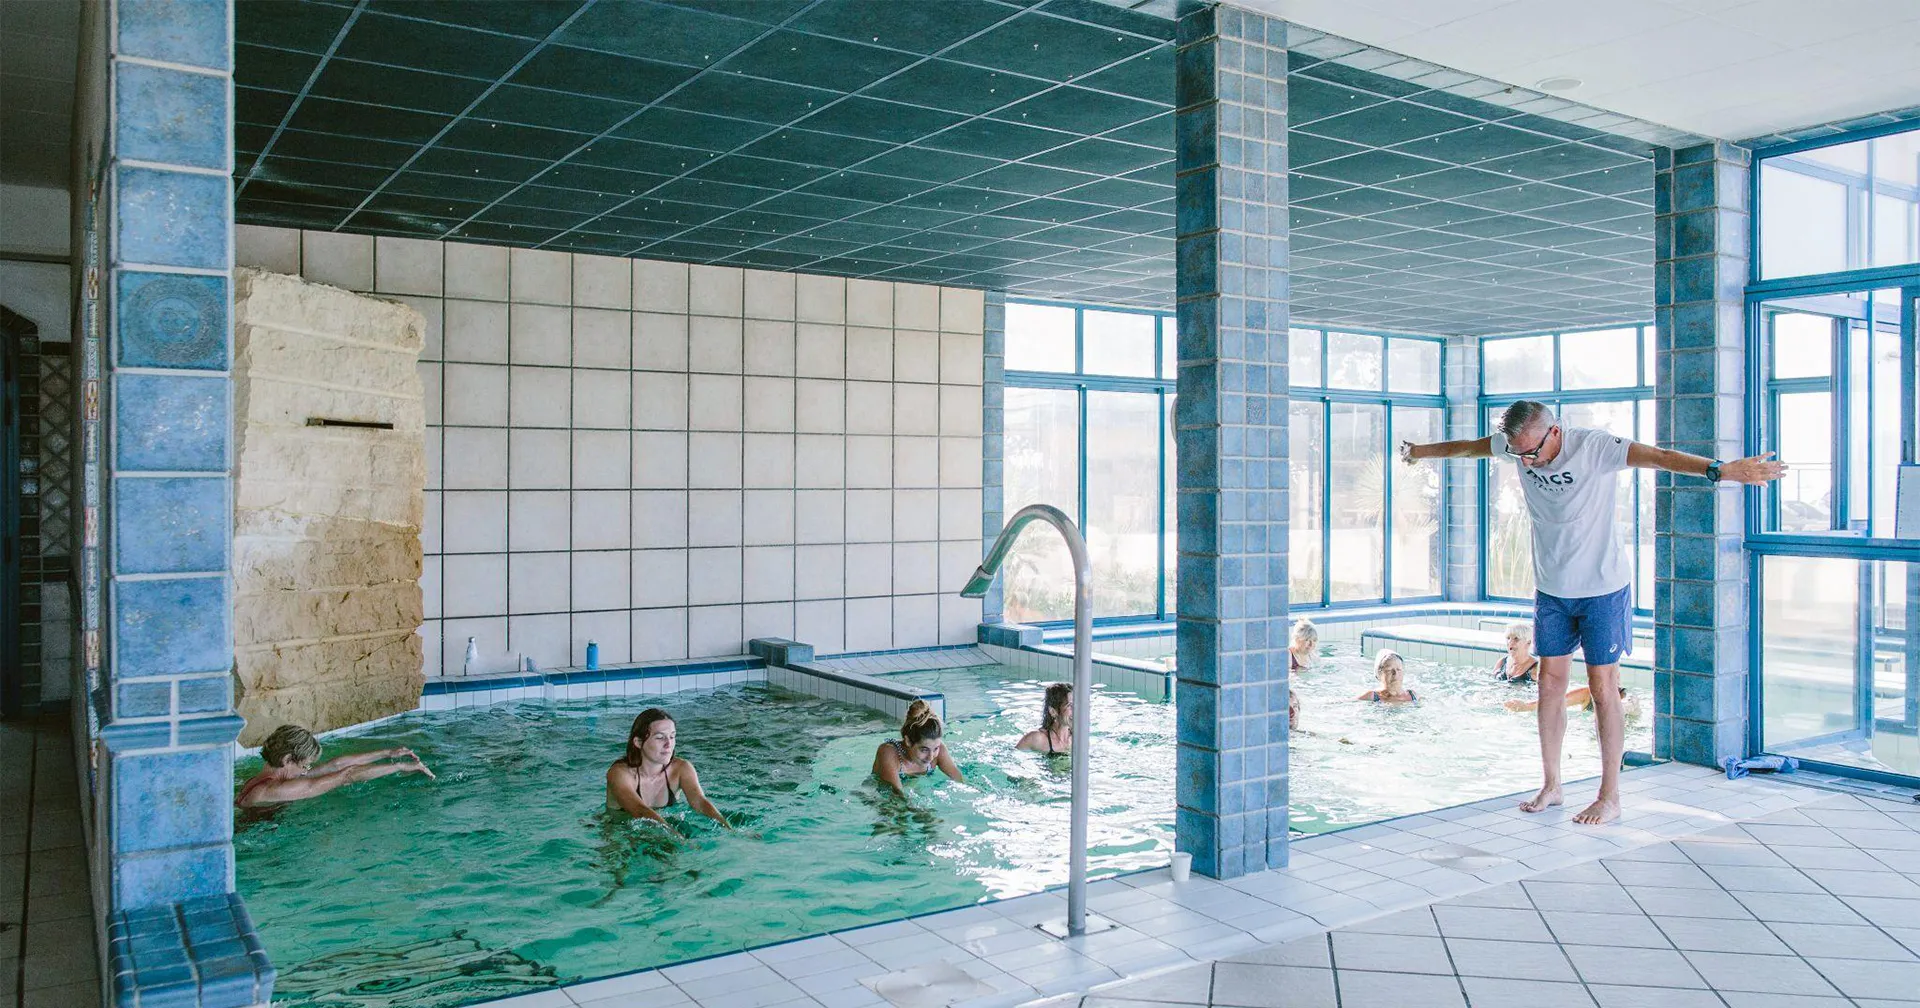 Stay fit all year round with aquagym classes led by a sports coach.